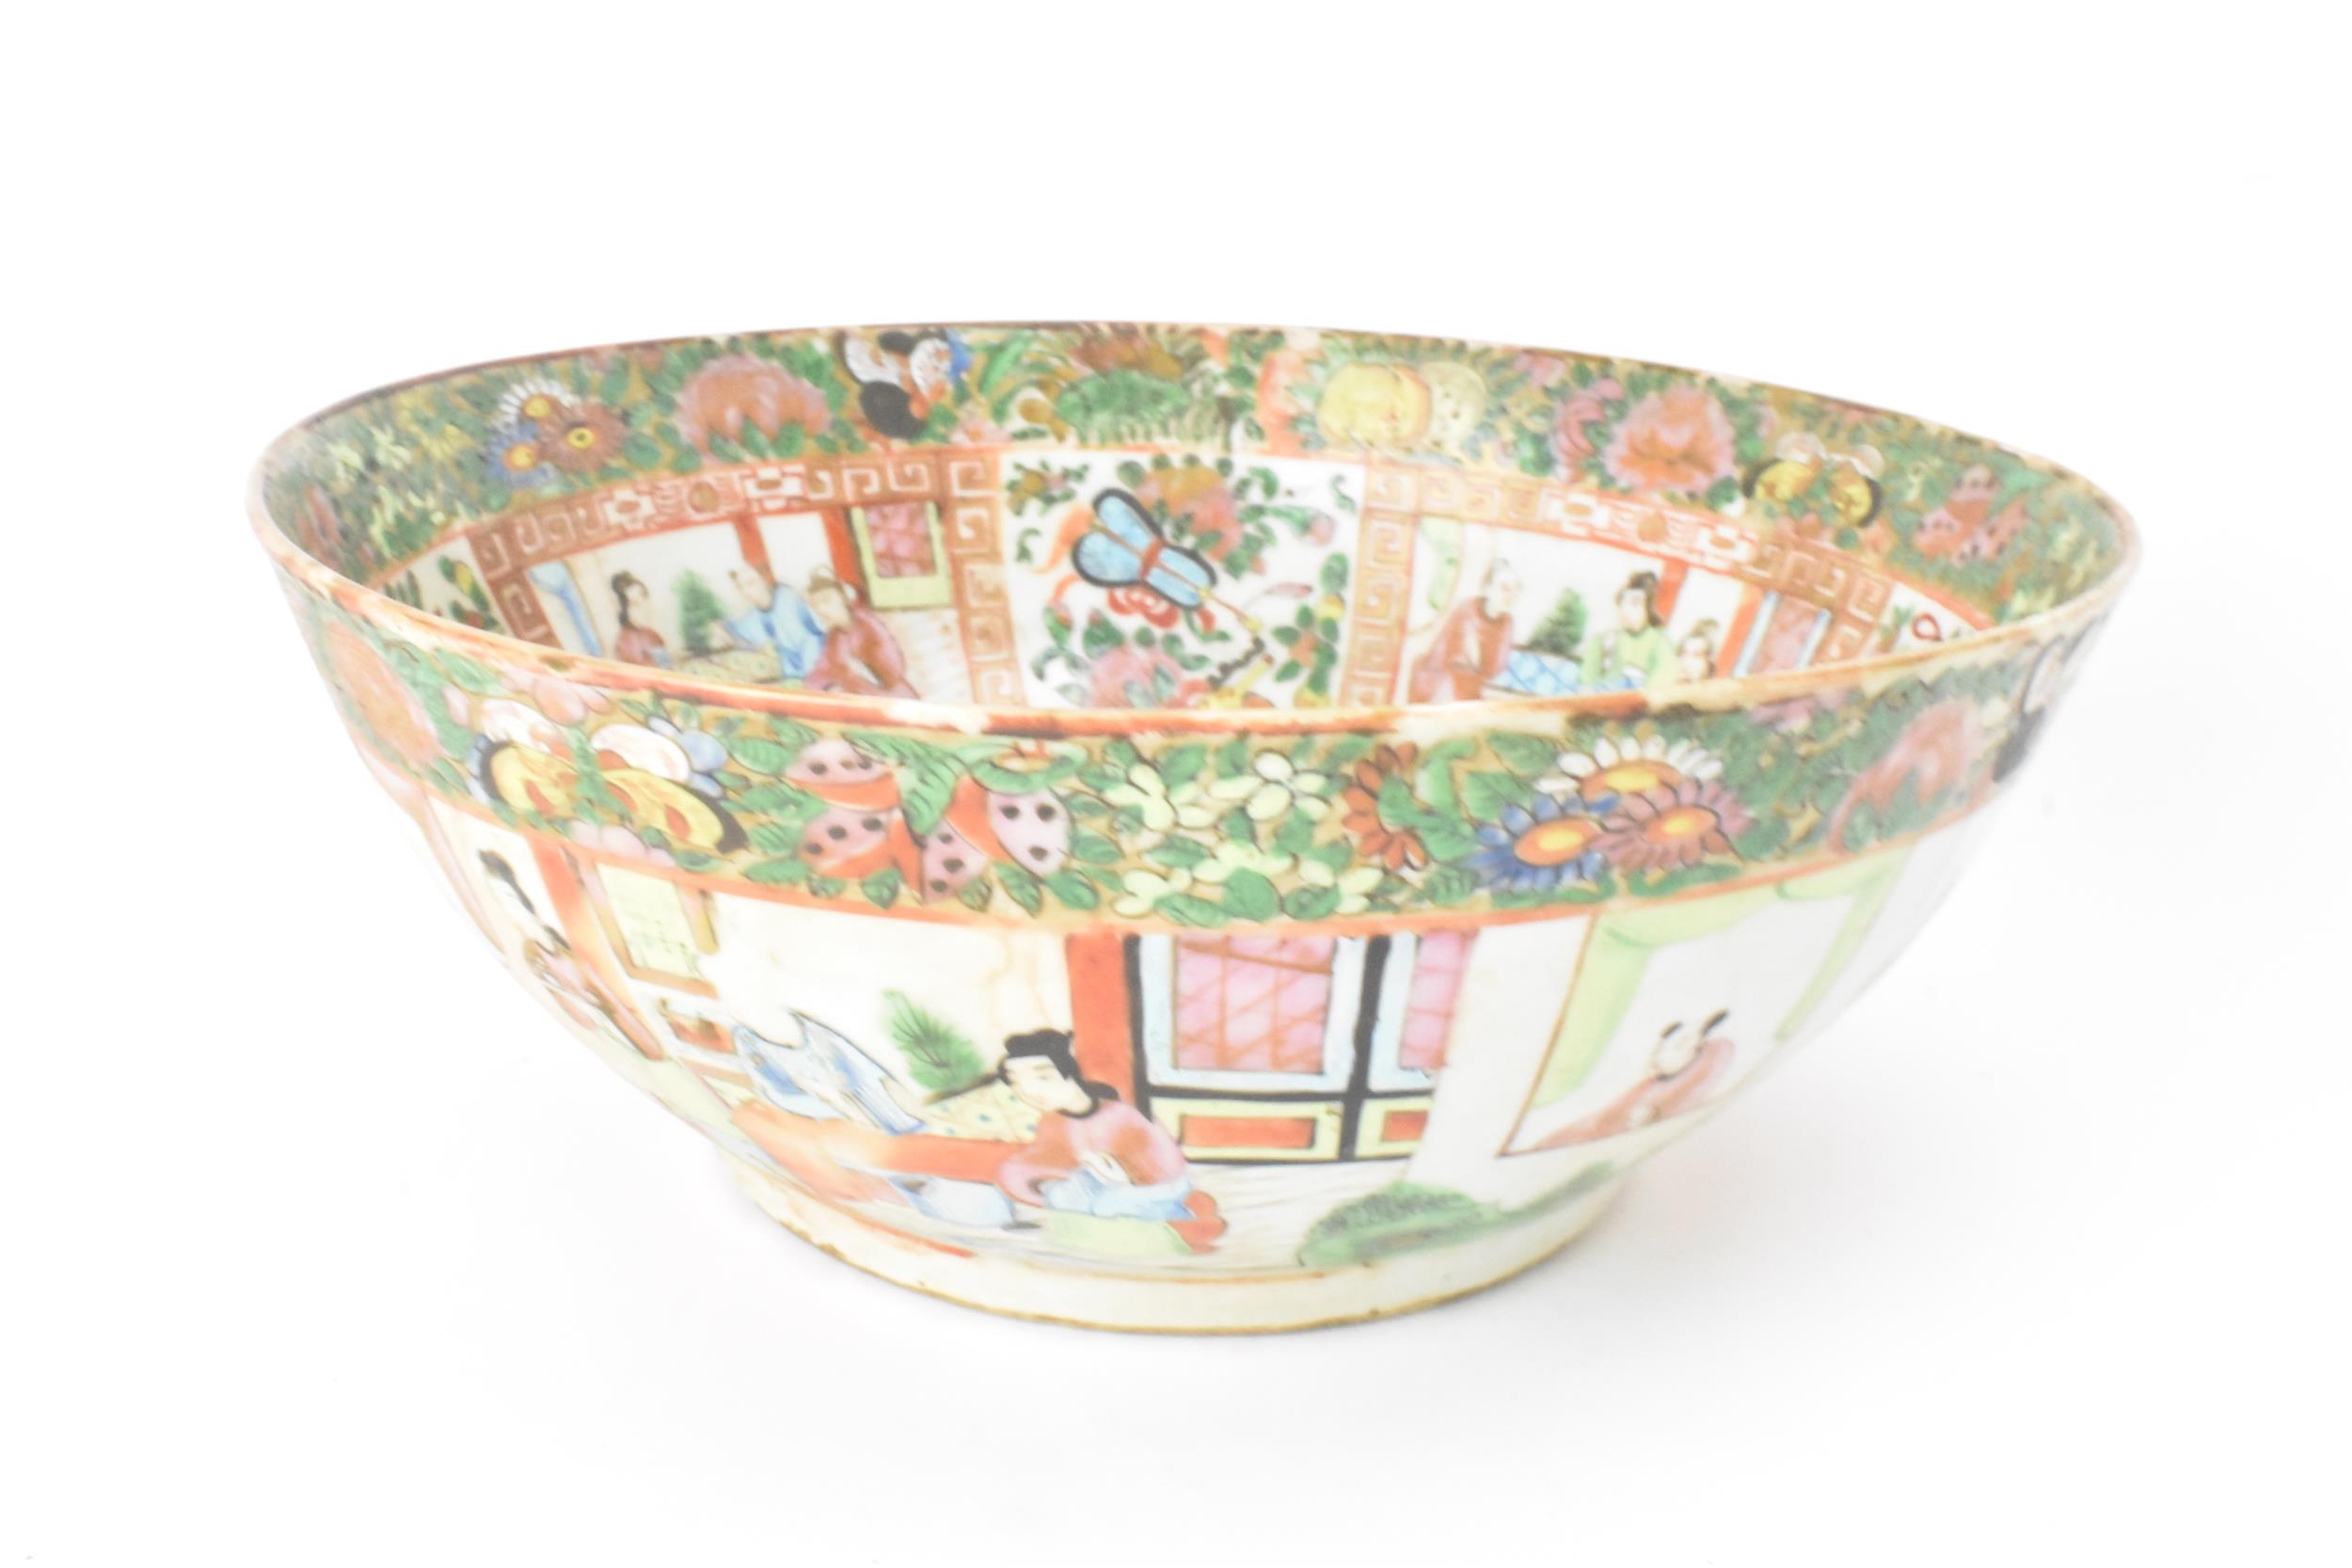 A pair of Chinese export late 19th century Canton Famille Rose porcelain bowls, in polychrome - Image 11 of 12